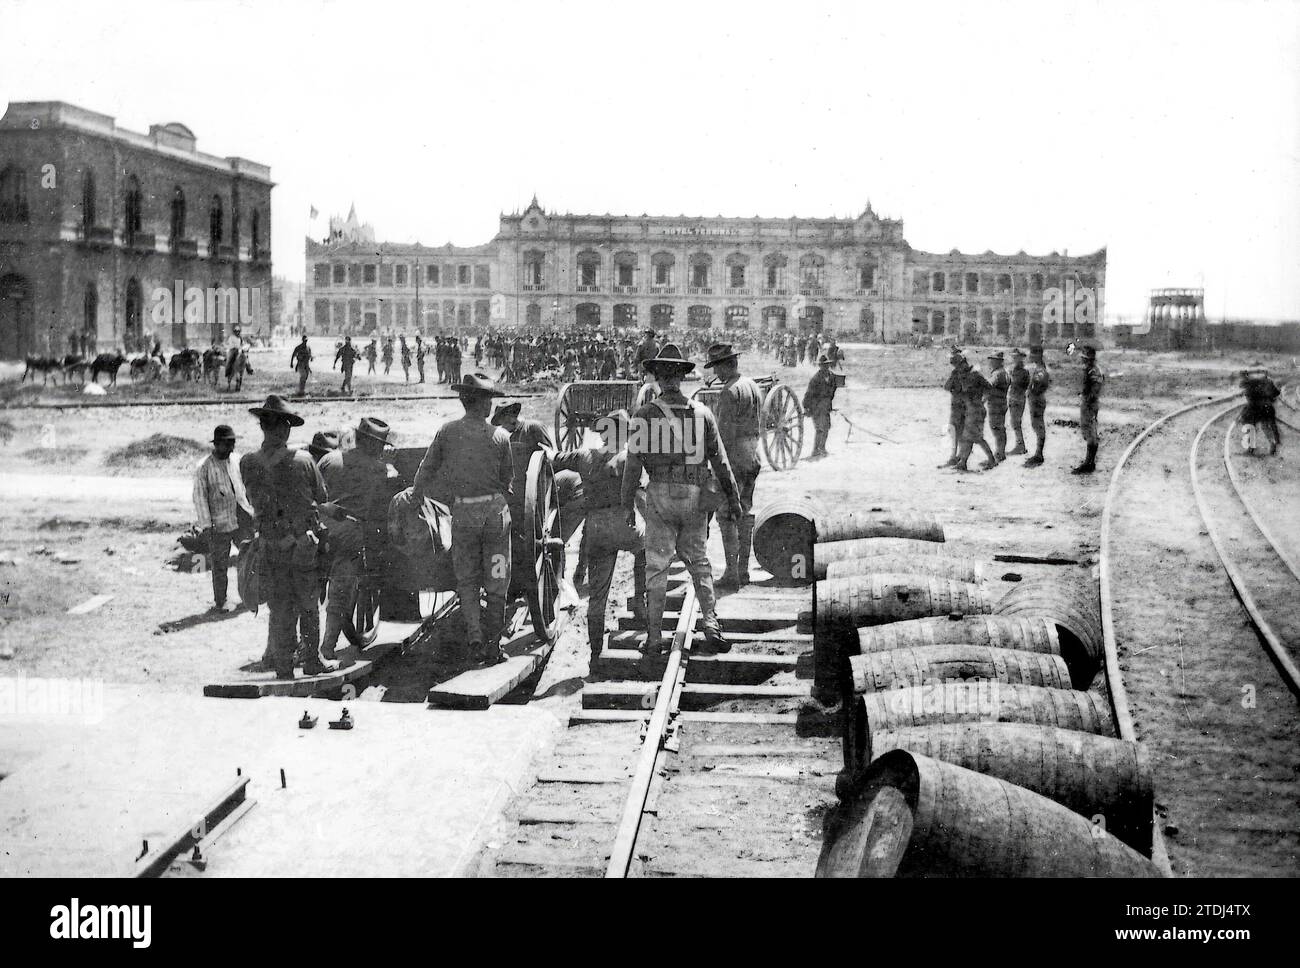 04/30/1914. The Mexican Yankee conflict. North American Sailors Placing Cannons in the Streets of Veracruz. Photo: Hugelmann. Credit: Album / Archivo ABC / Louis Hugelmann Stock Photo